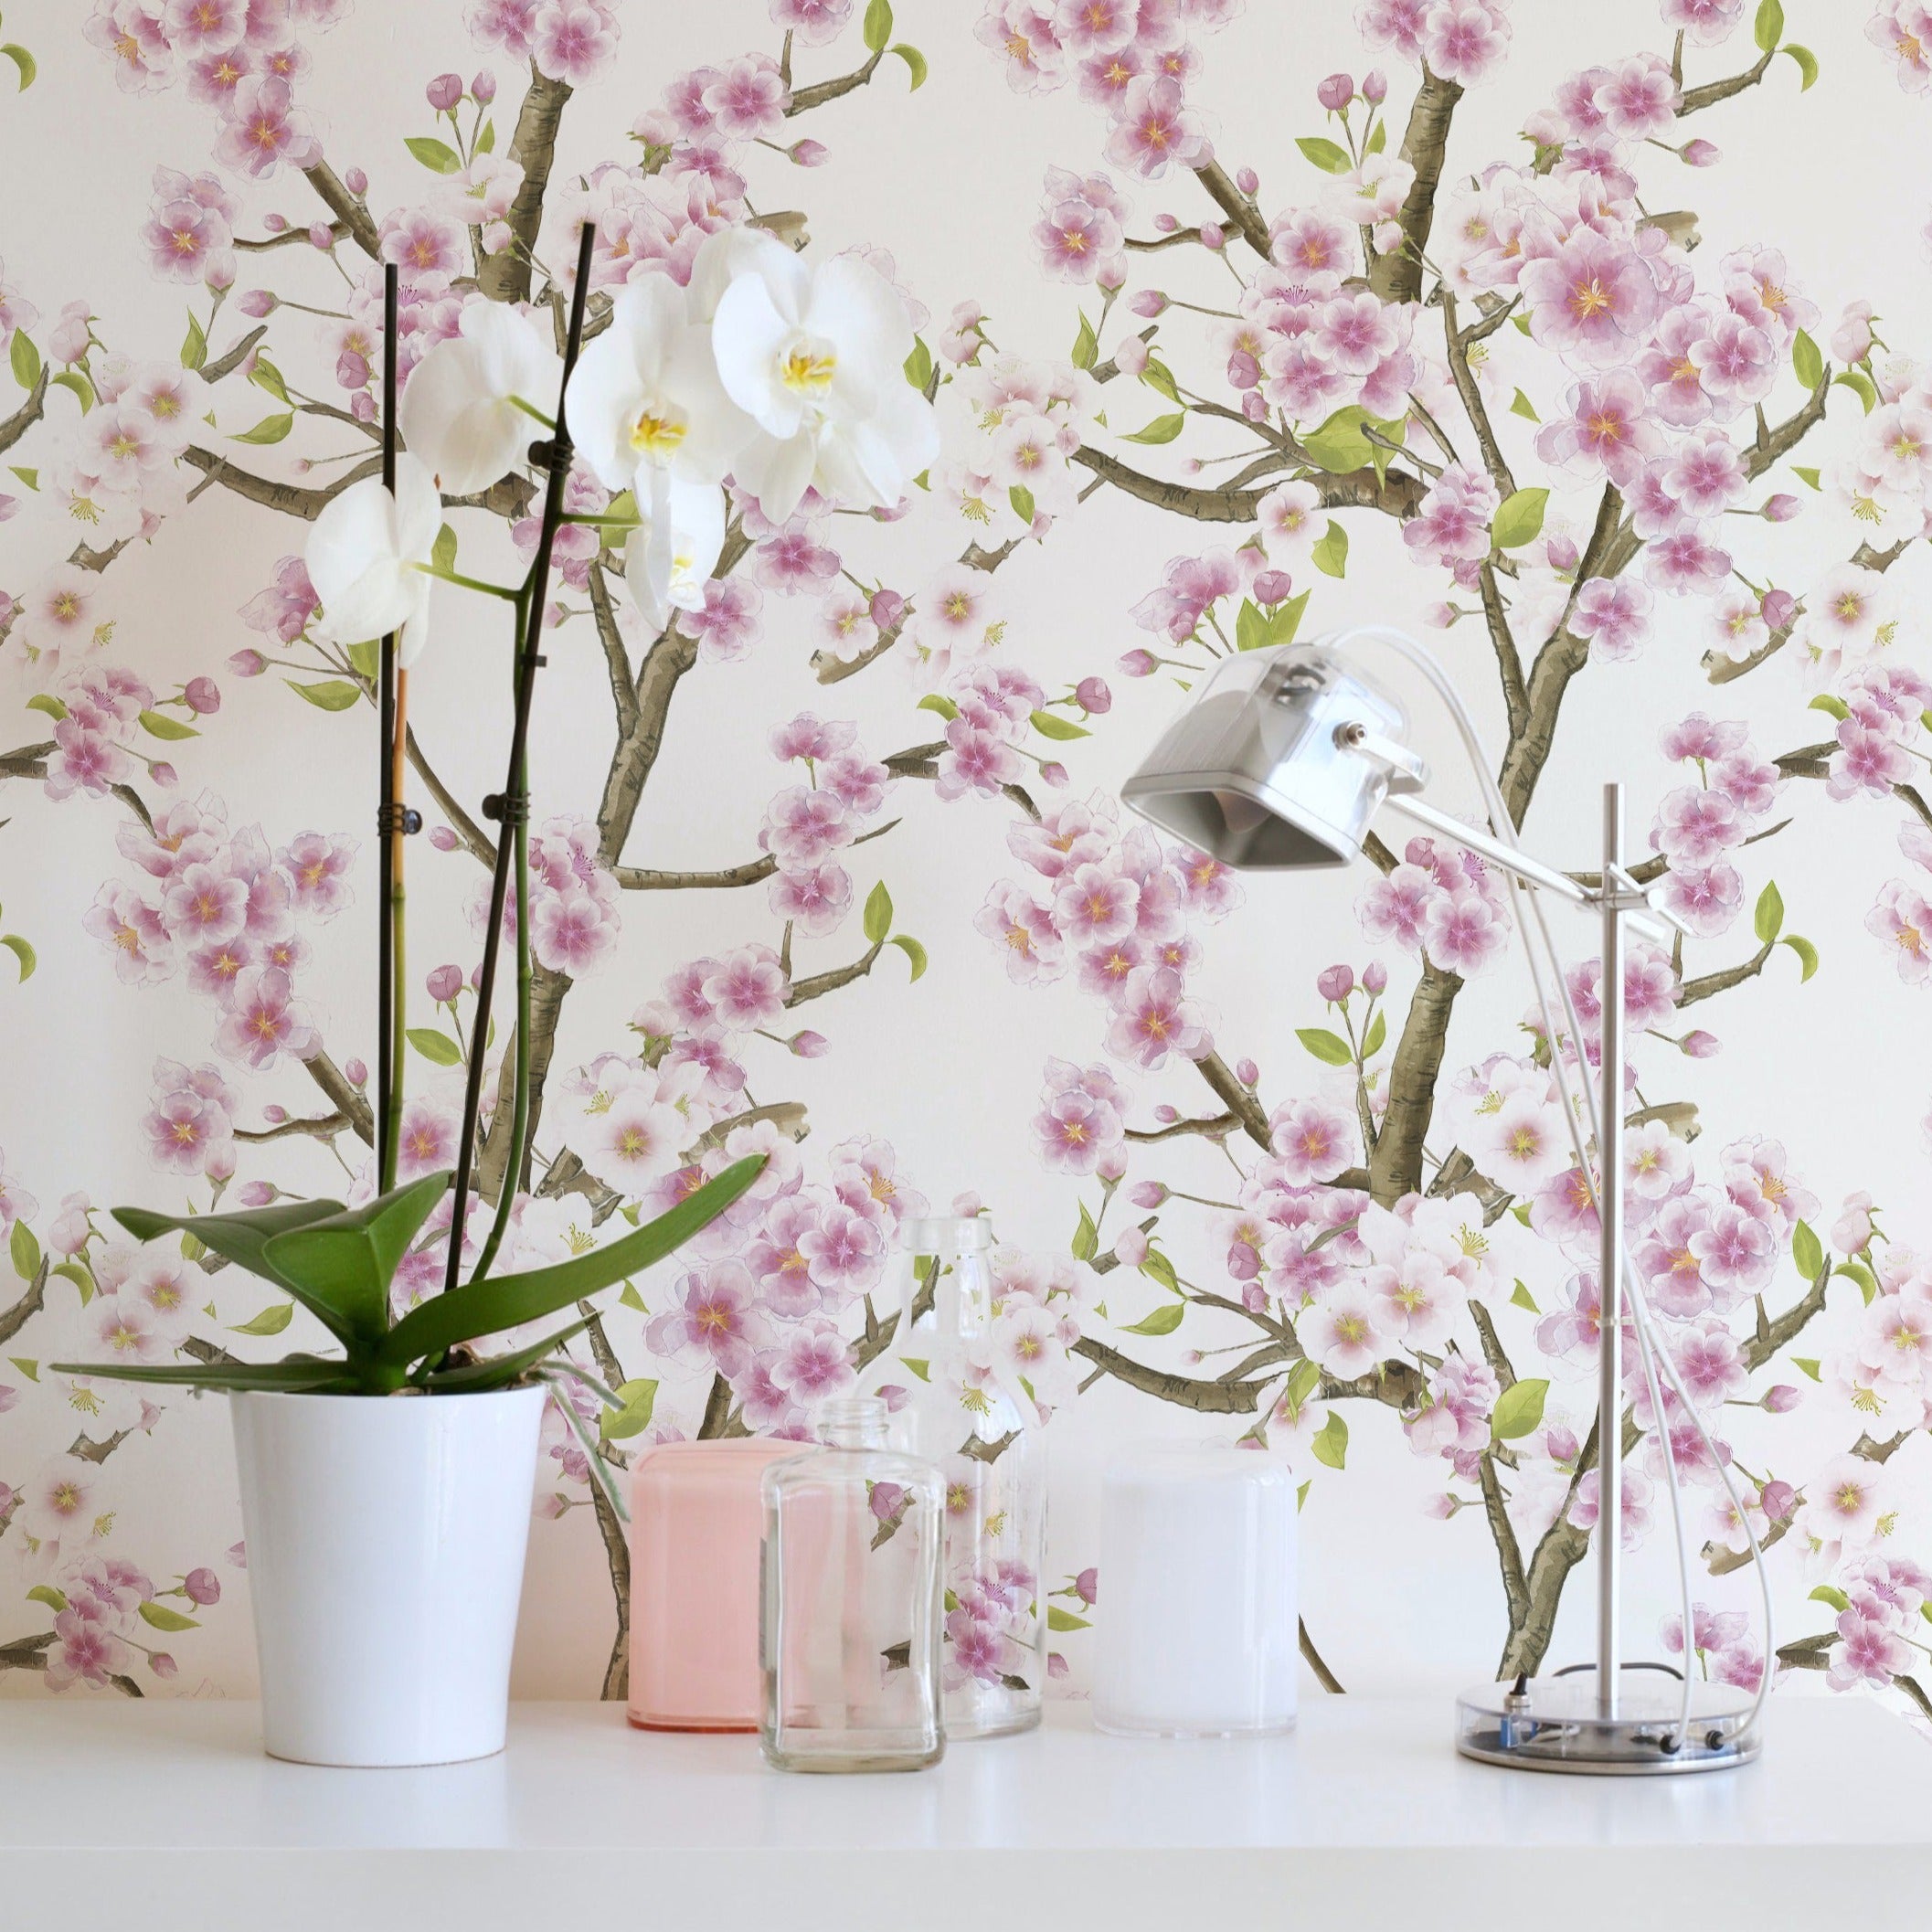 Sakura Blossom Wallpaper enhancing a contemporary bathroom setting, with vibrant pink cherry blossoms on slender branches spread across a white background, paired with modern decor and natural elements for a refreshing interior.